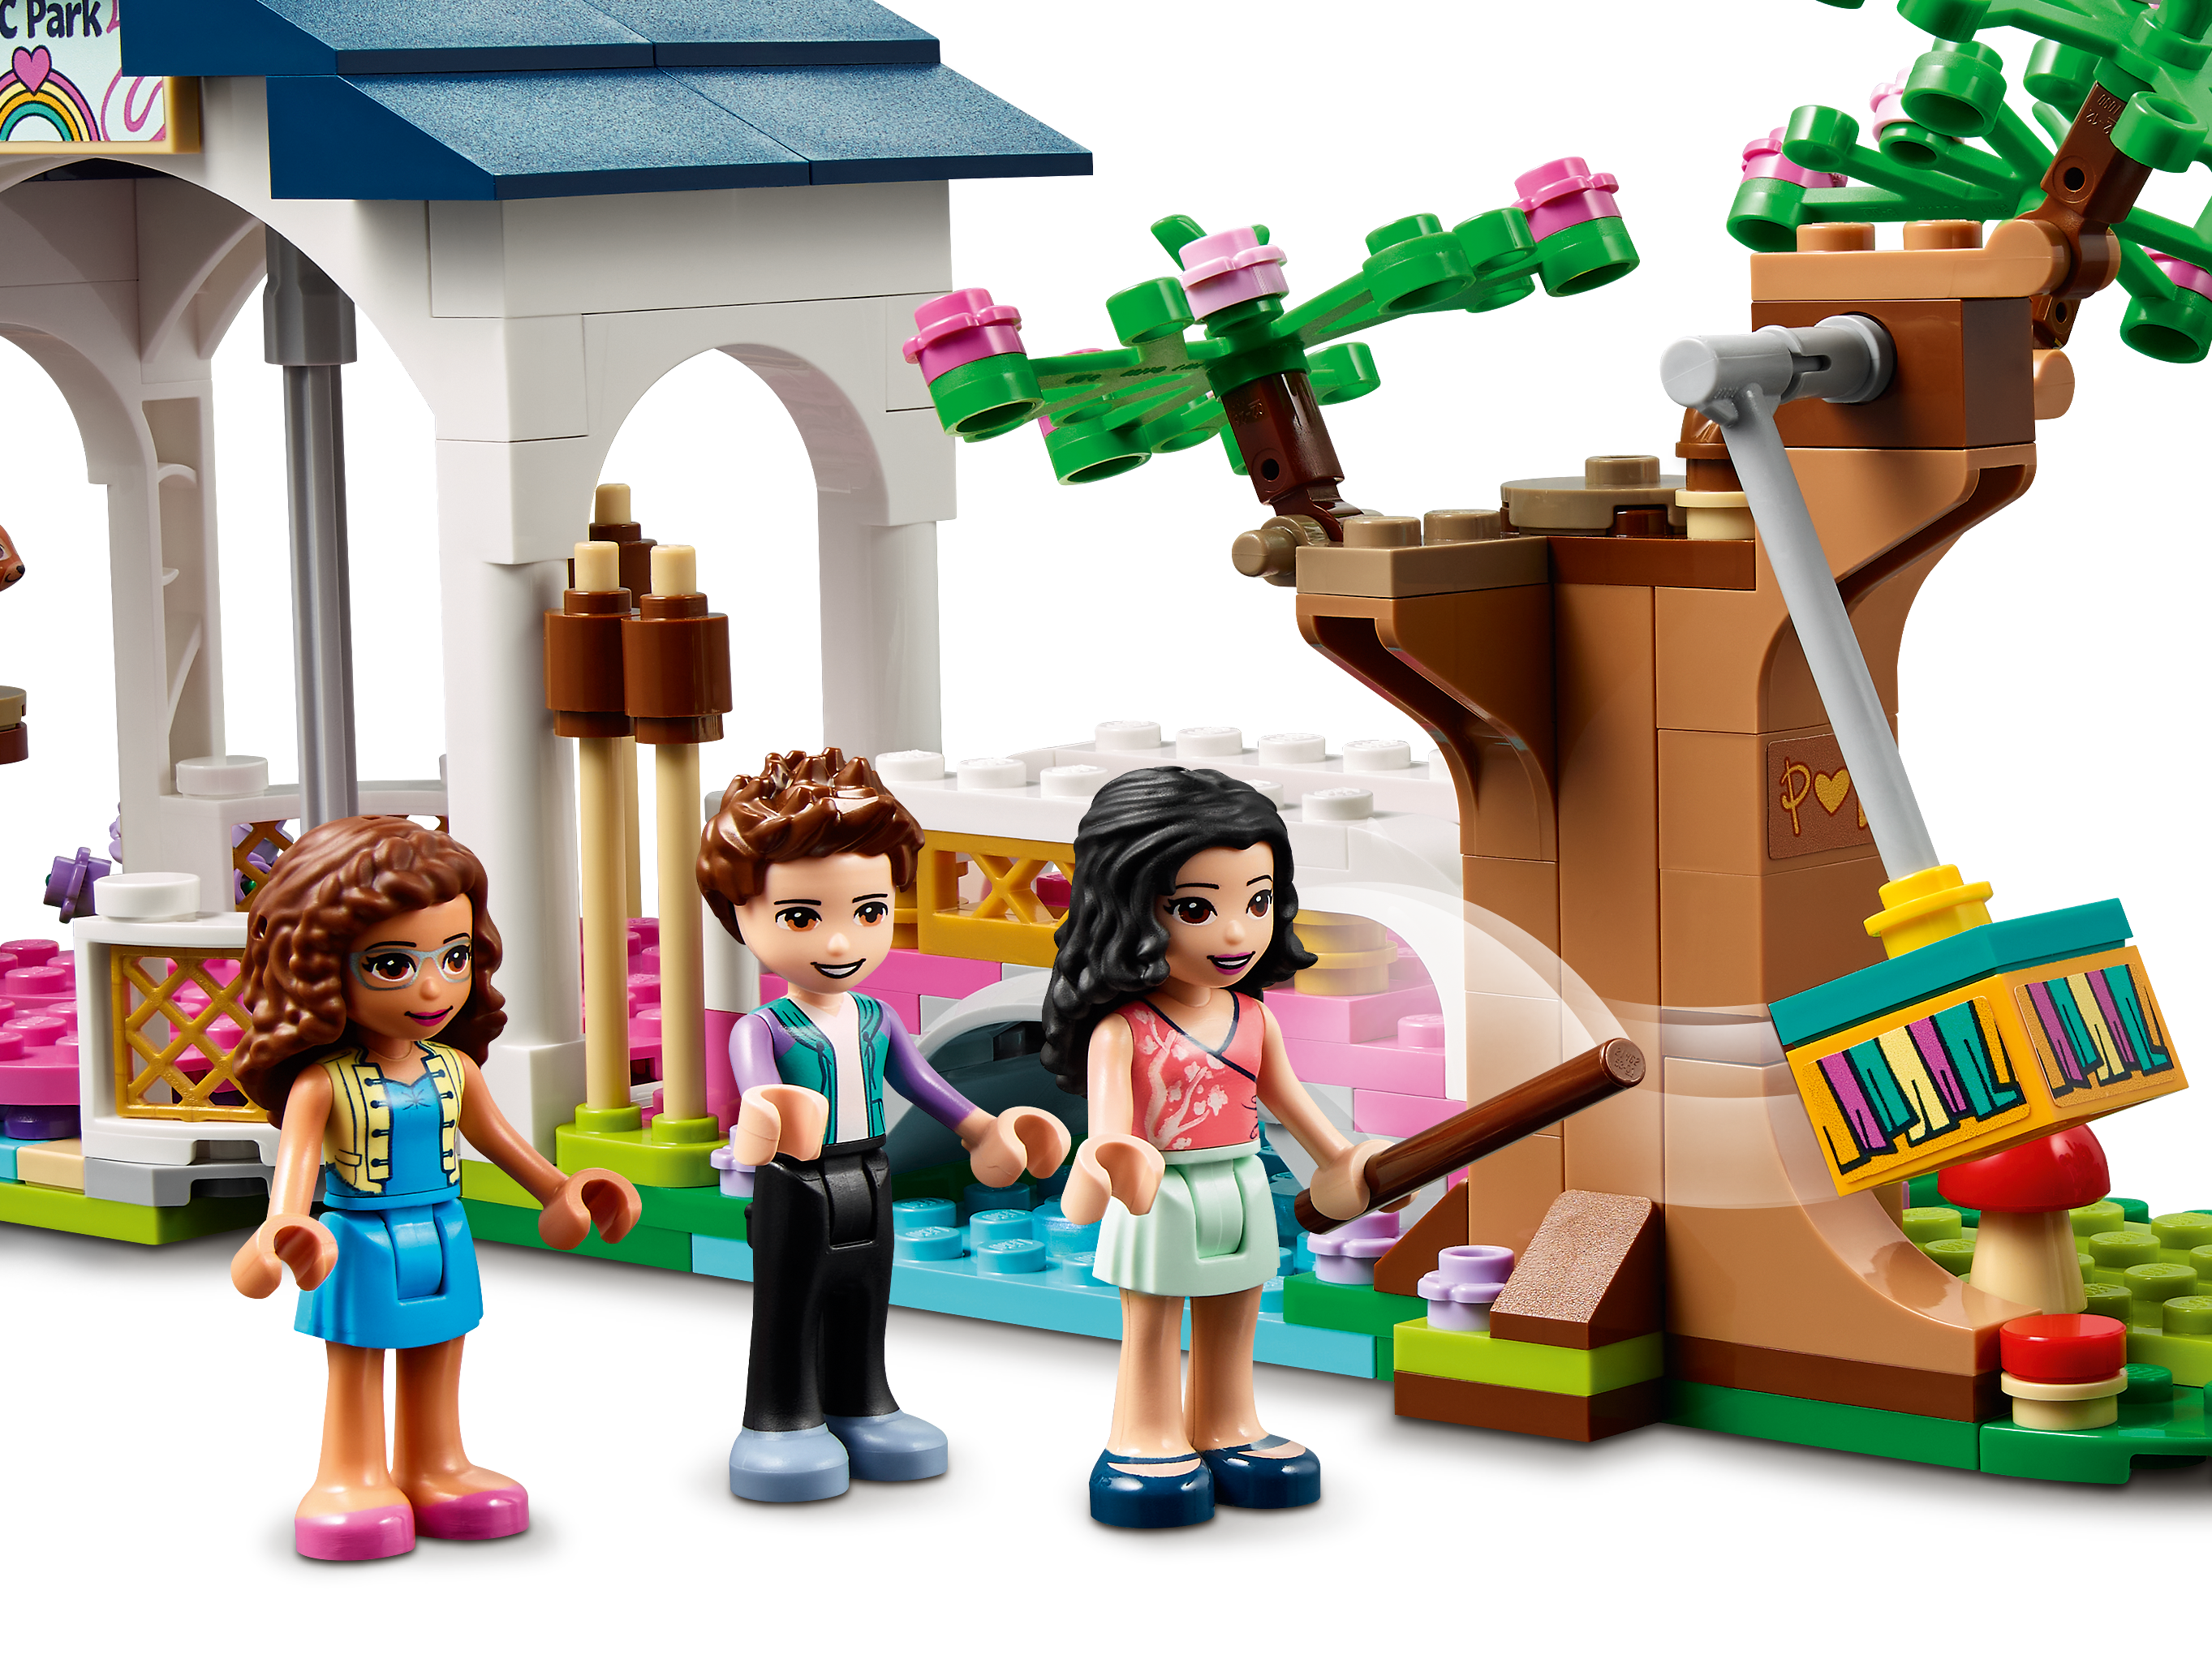 LEGO Friends Heartlake City Resort Block Building Toy 41347 F/S From Japan  New